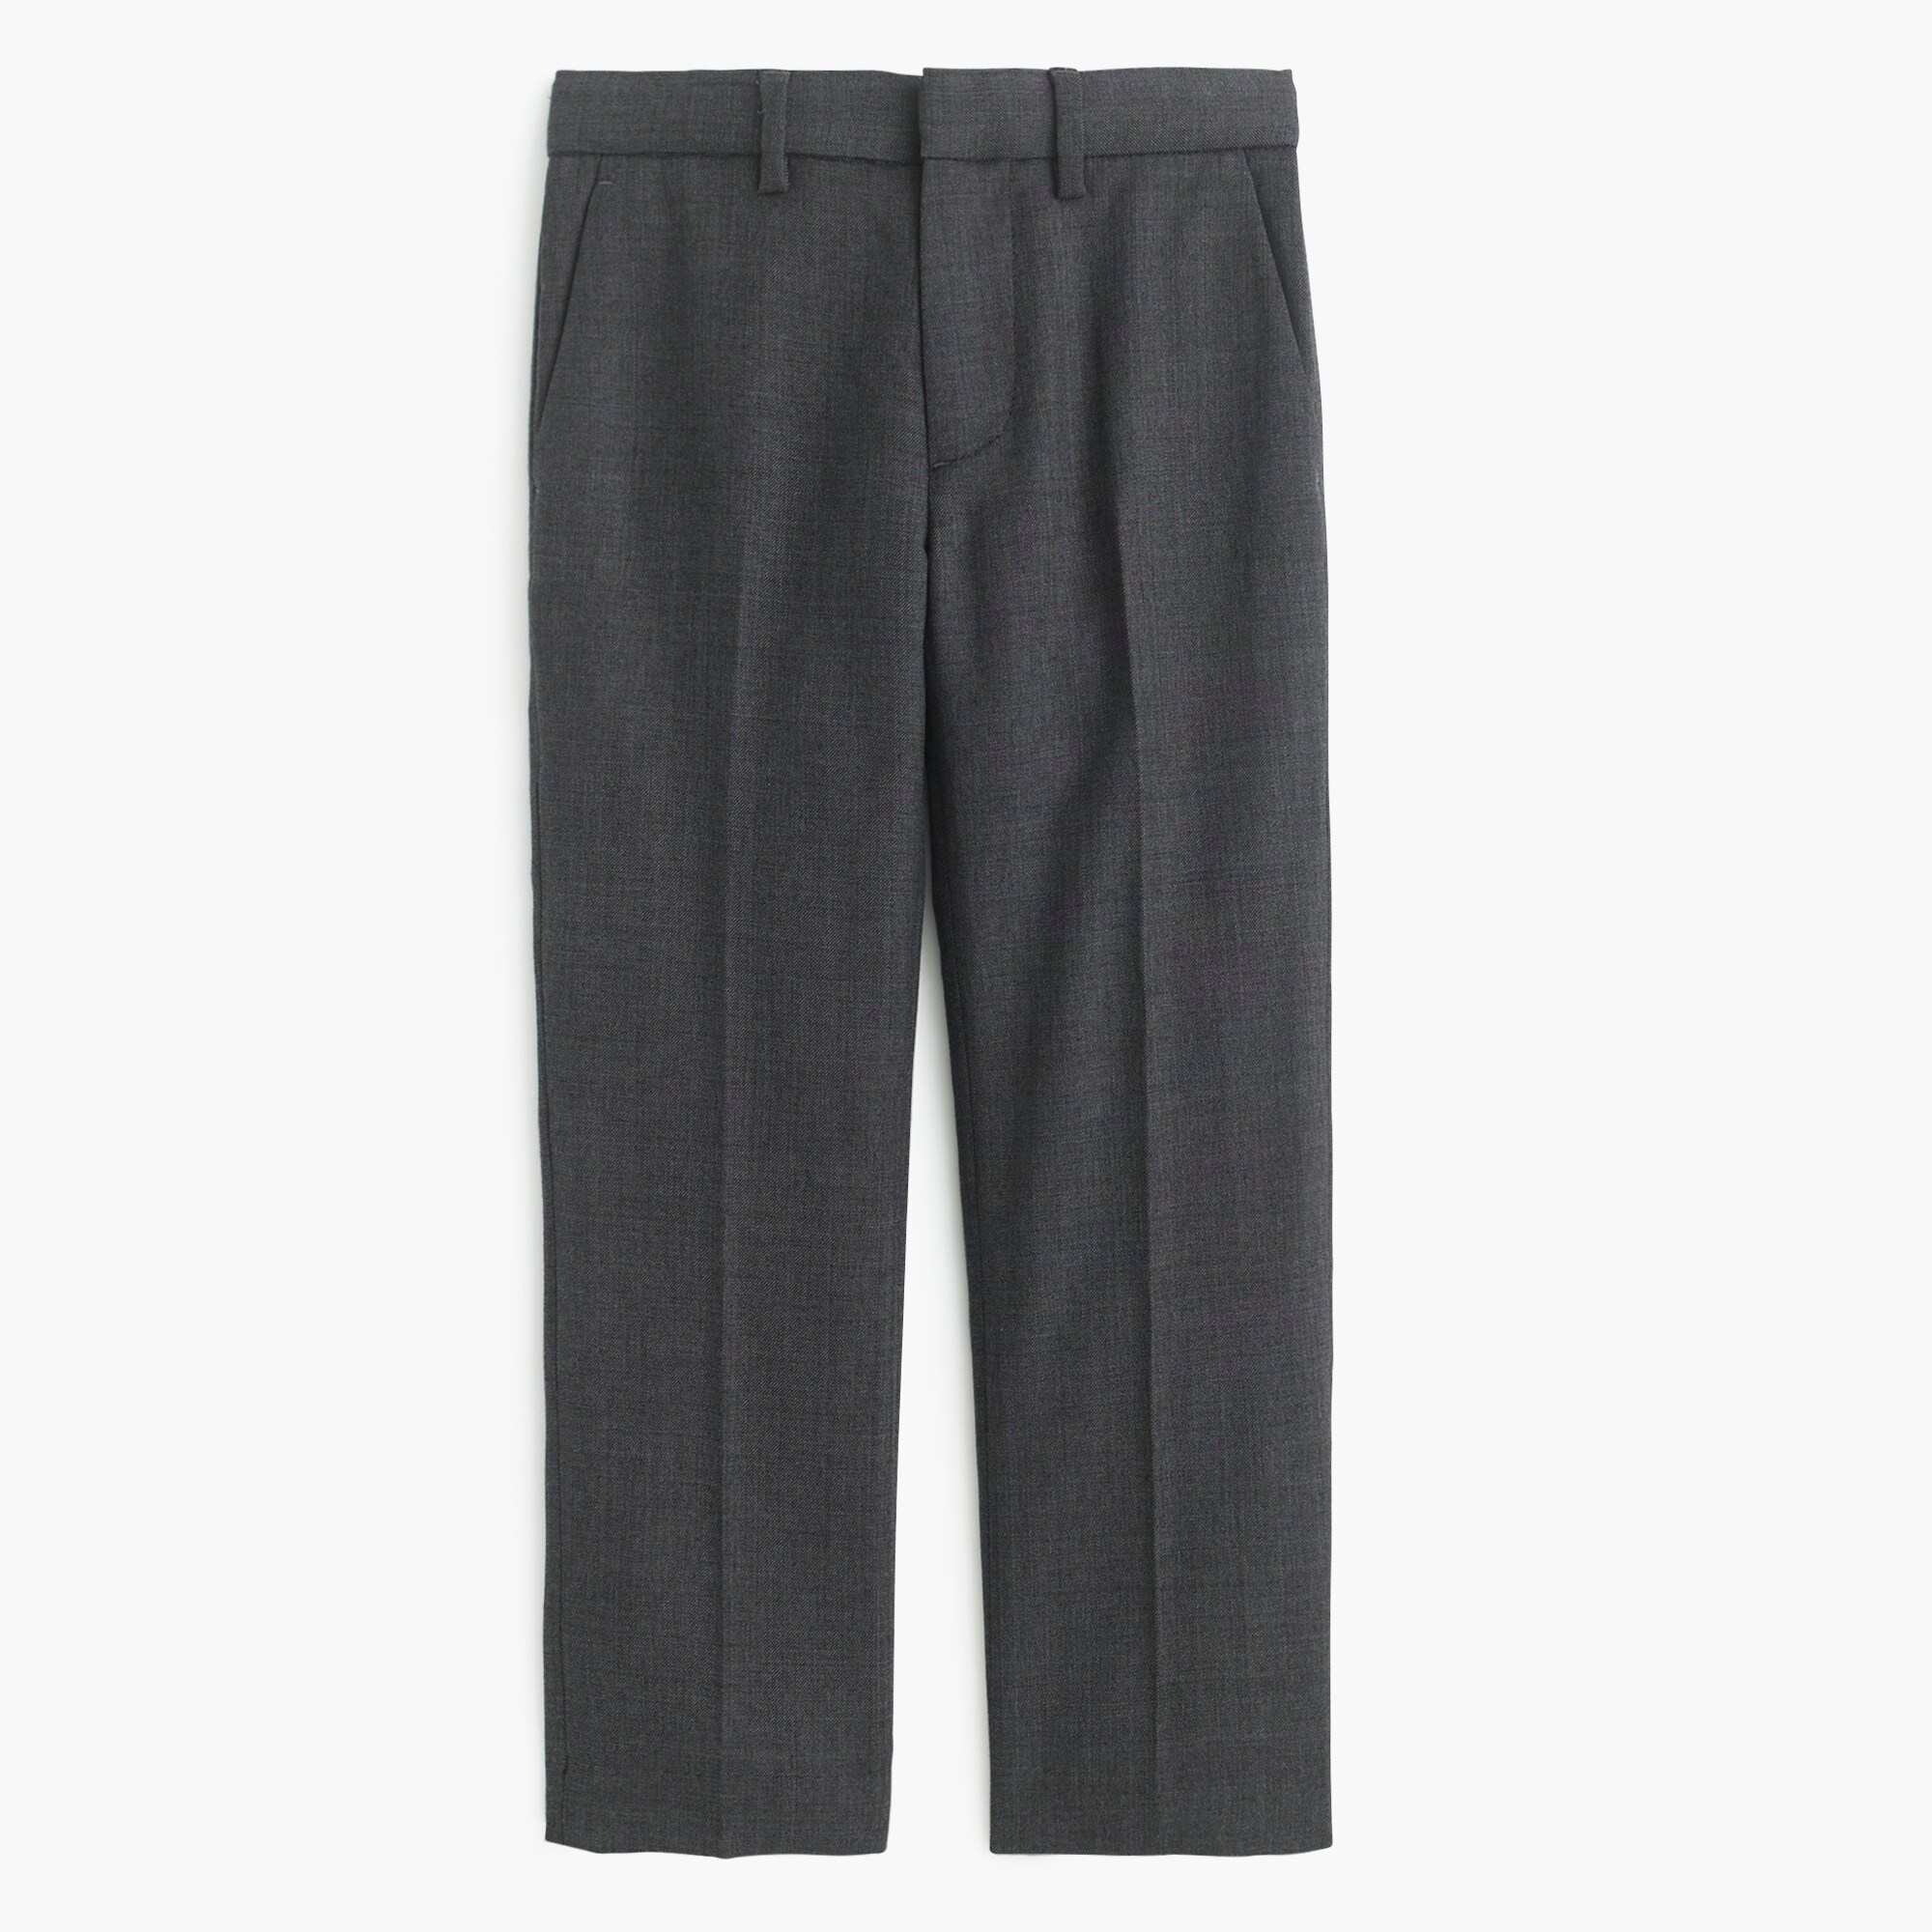 boys Boys' slim Ludlow suit pant in stretch worsted wool blend